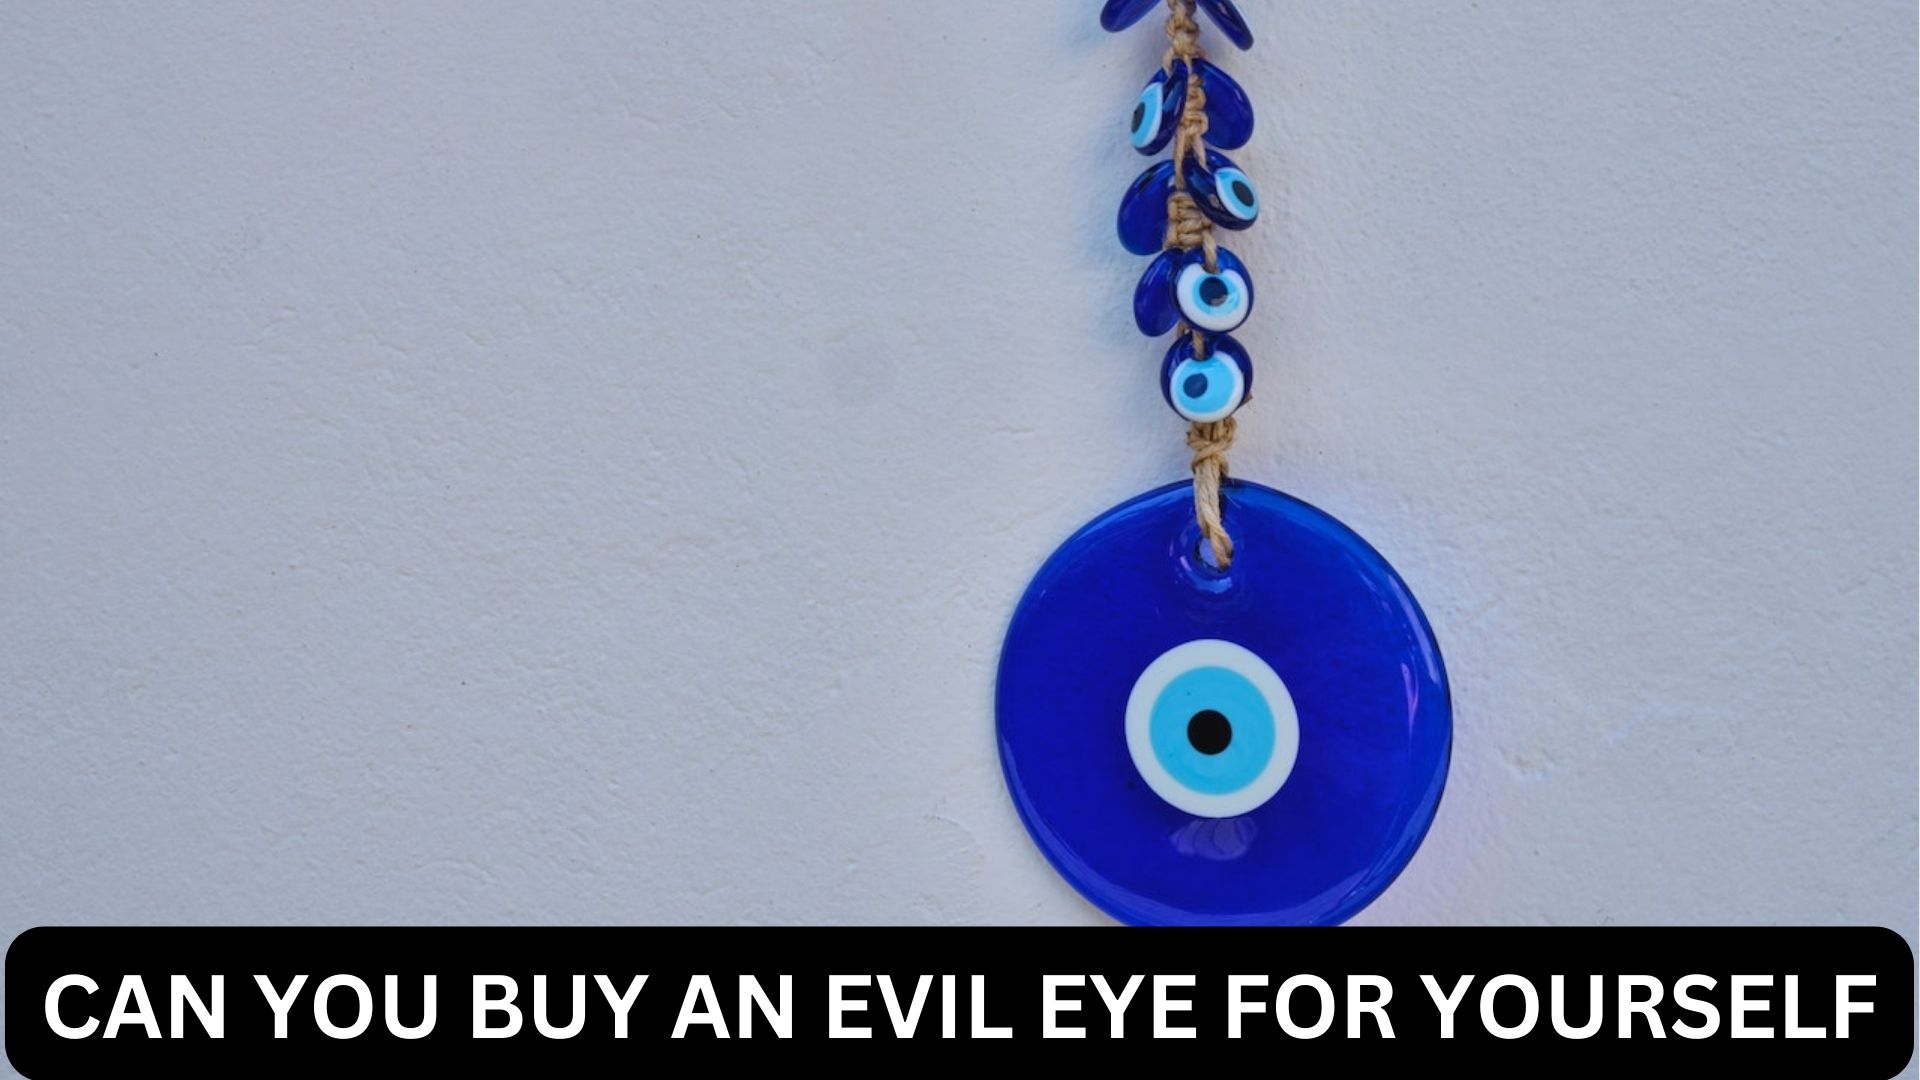 Can You Buy An Evil Eye For Yourself?